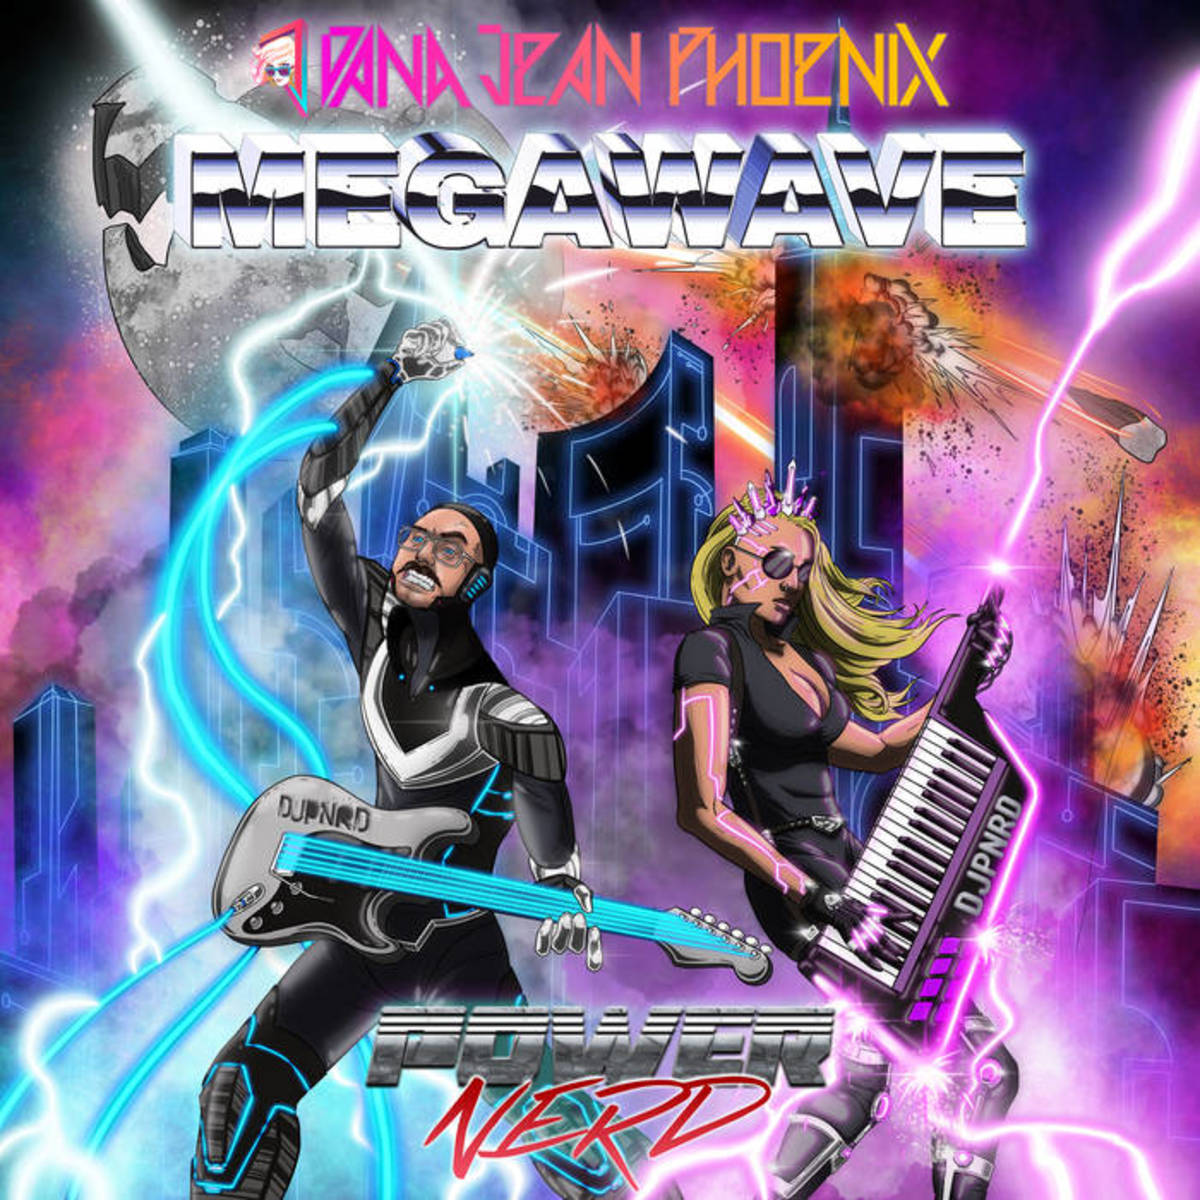 synth-album-review-megawave-by-dana-jean-phoenix-and-powernerd